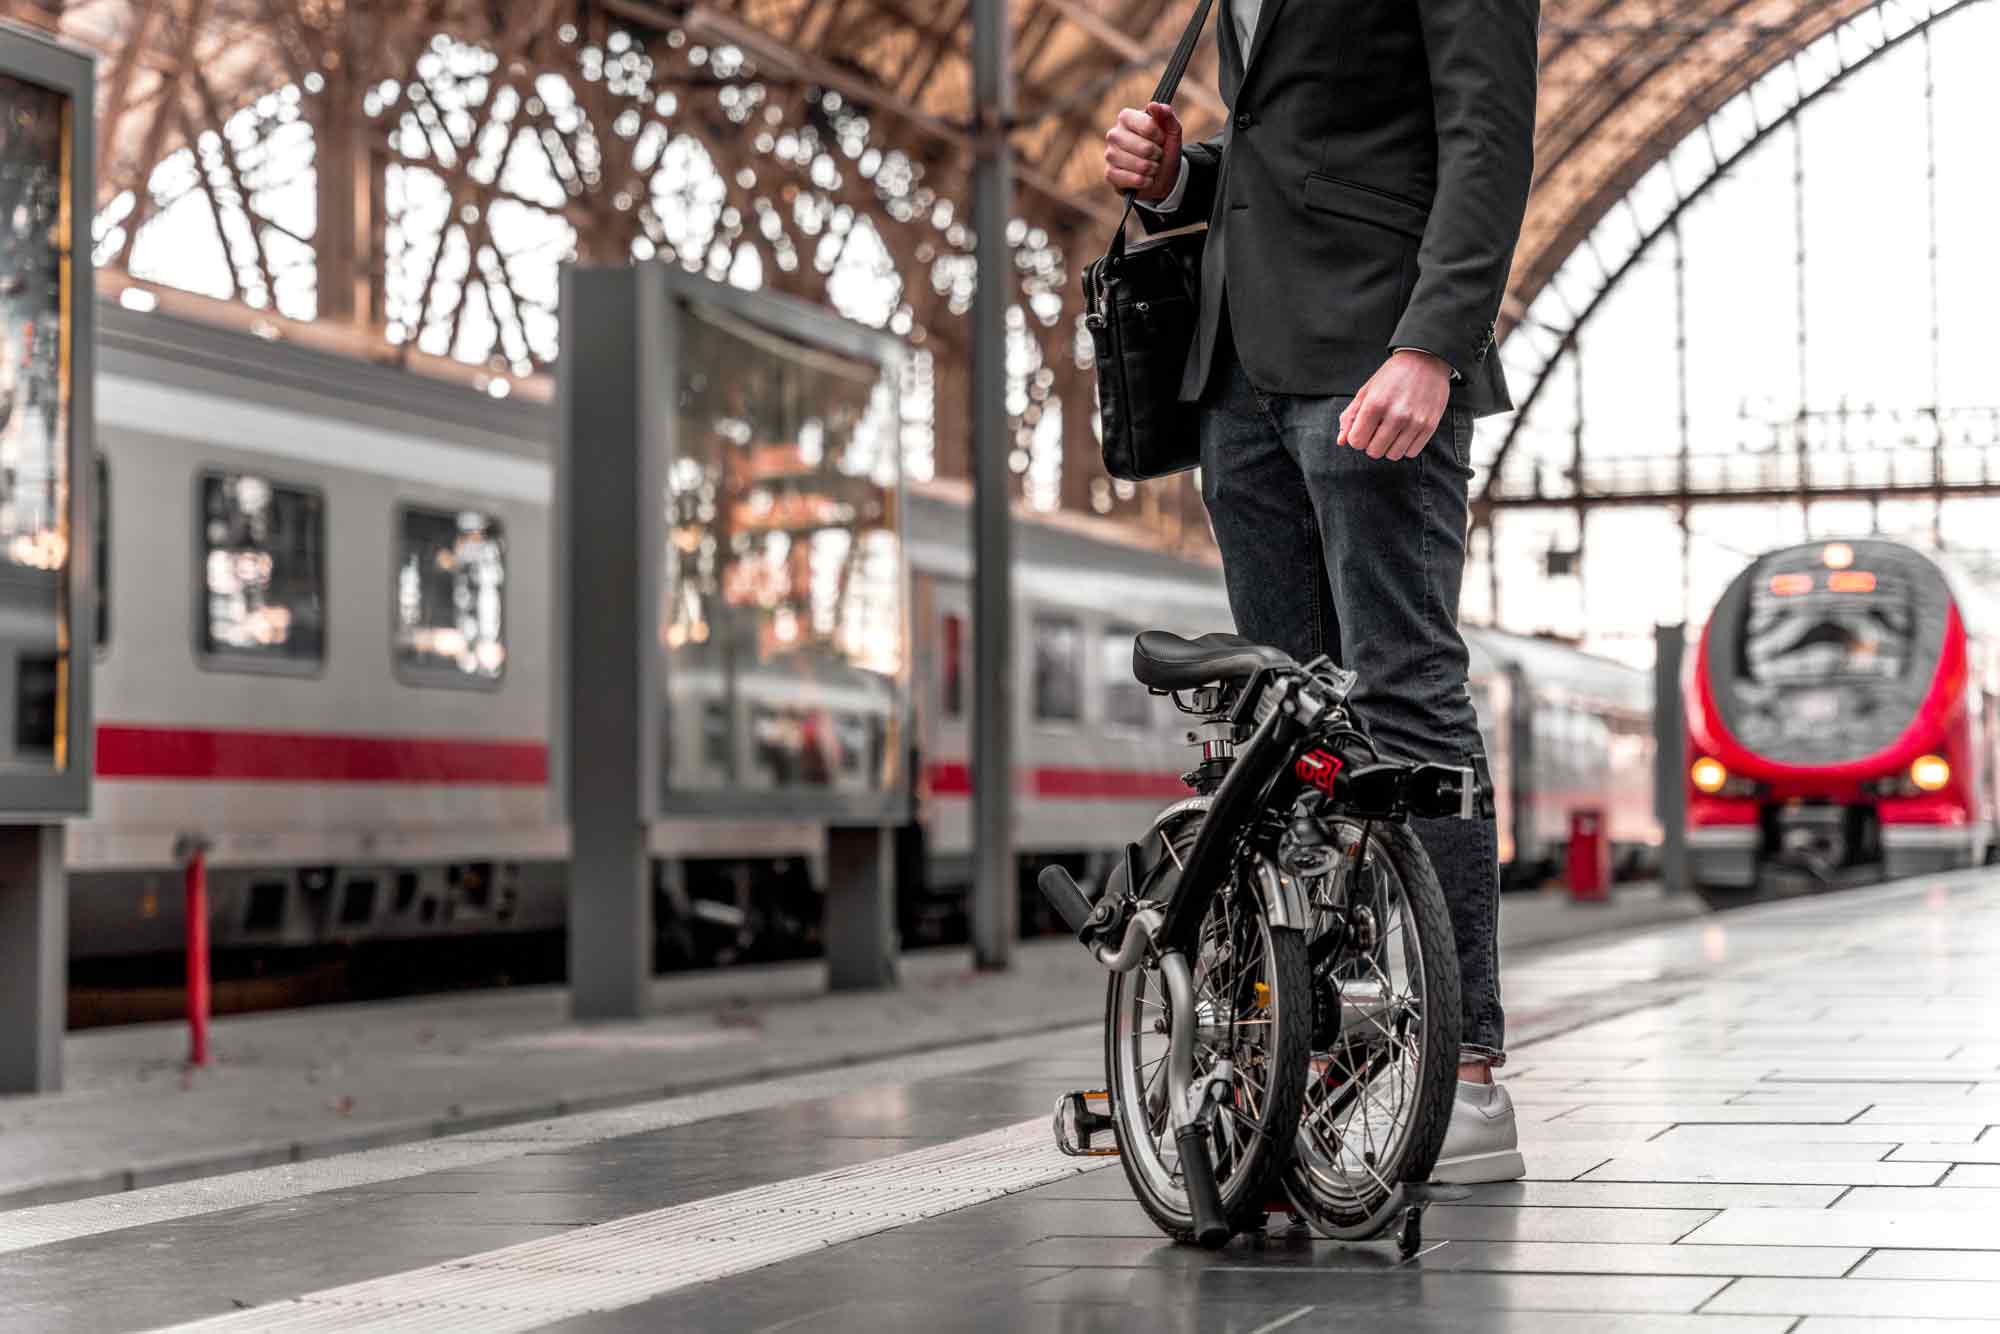 A brompton convinces with minimal "packing dimensions" and low weight. You won't take another bike on the train that easily!